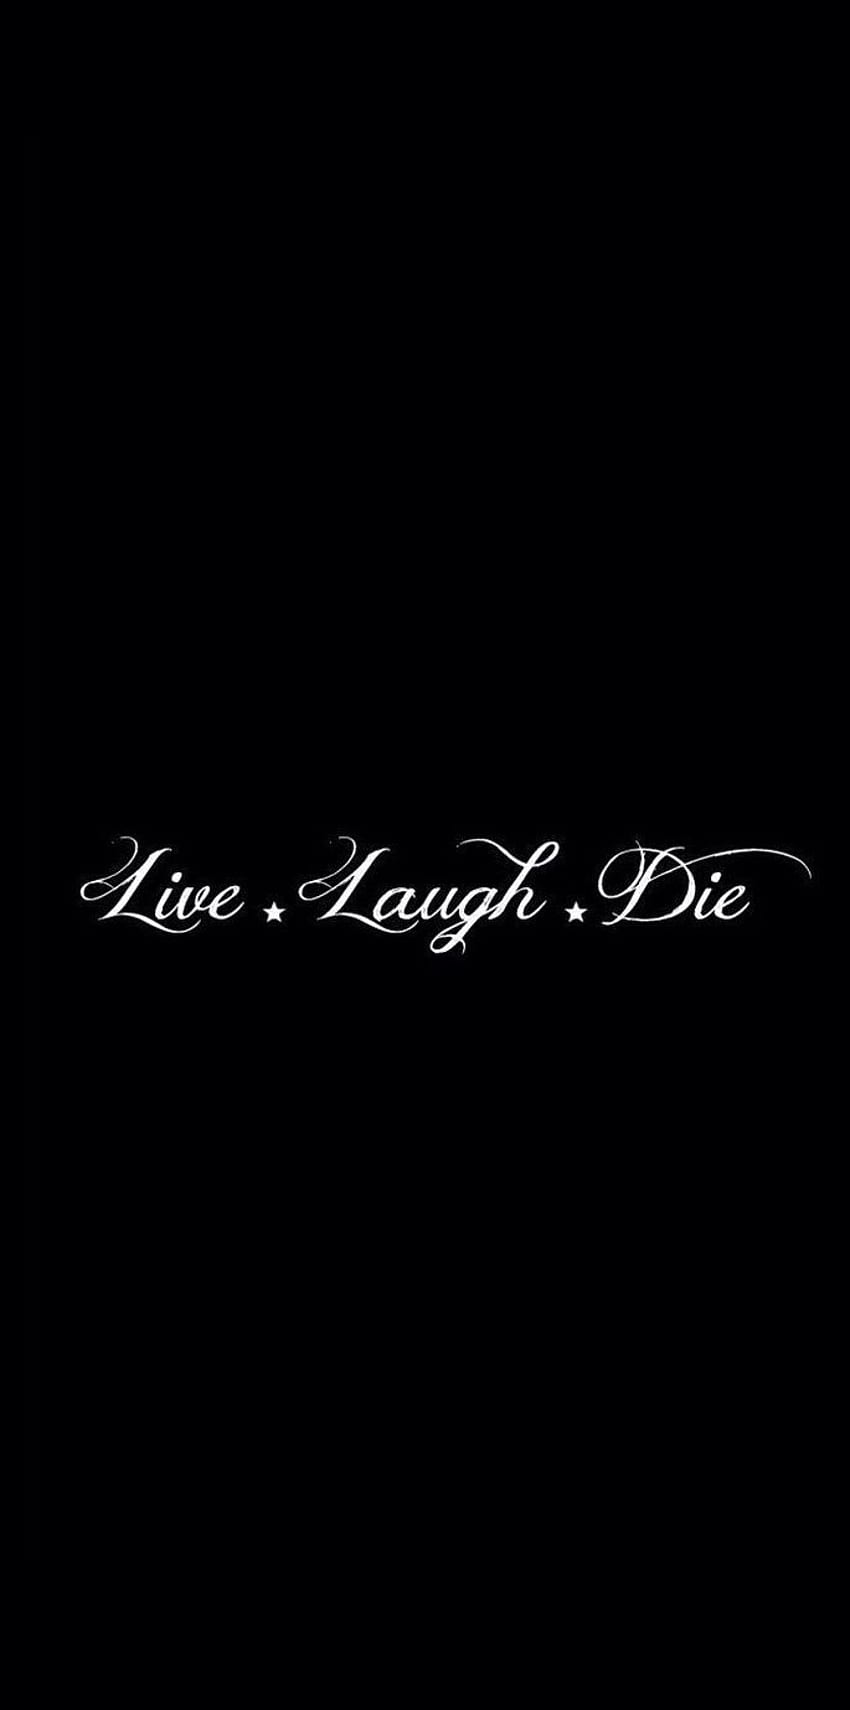 Live Laugh Die wallpaper for your phone - Black